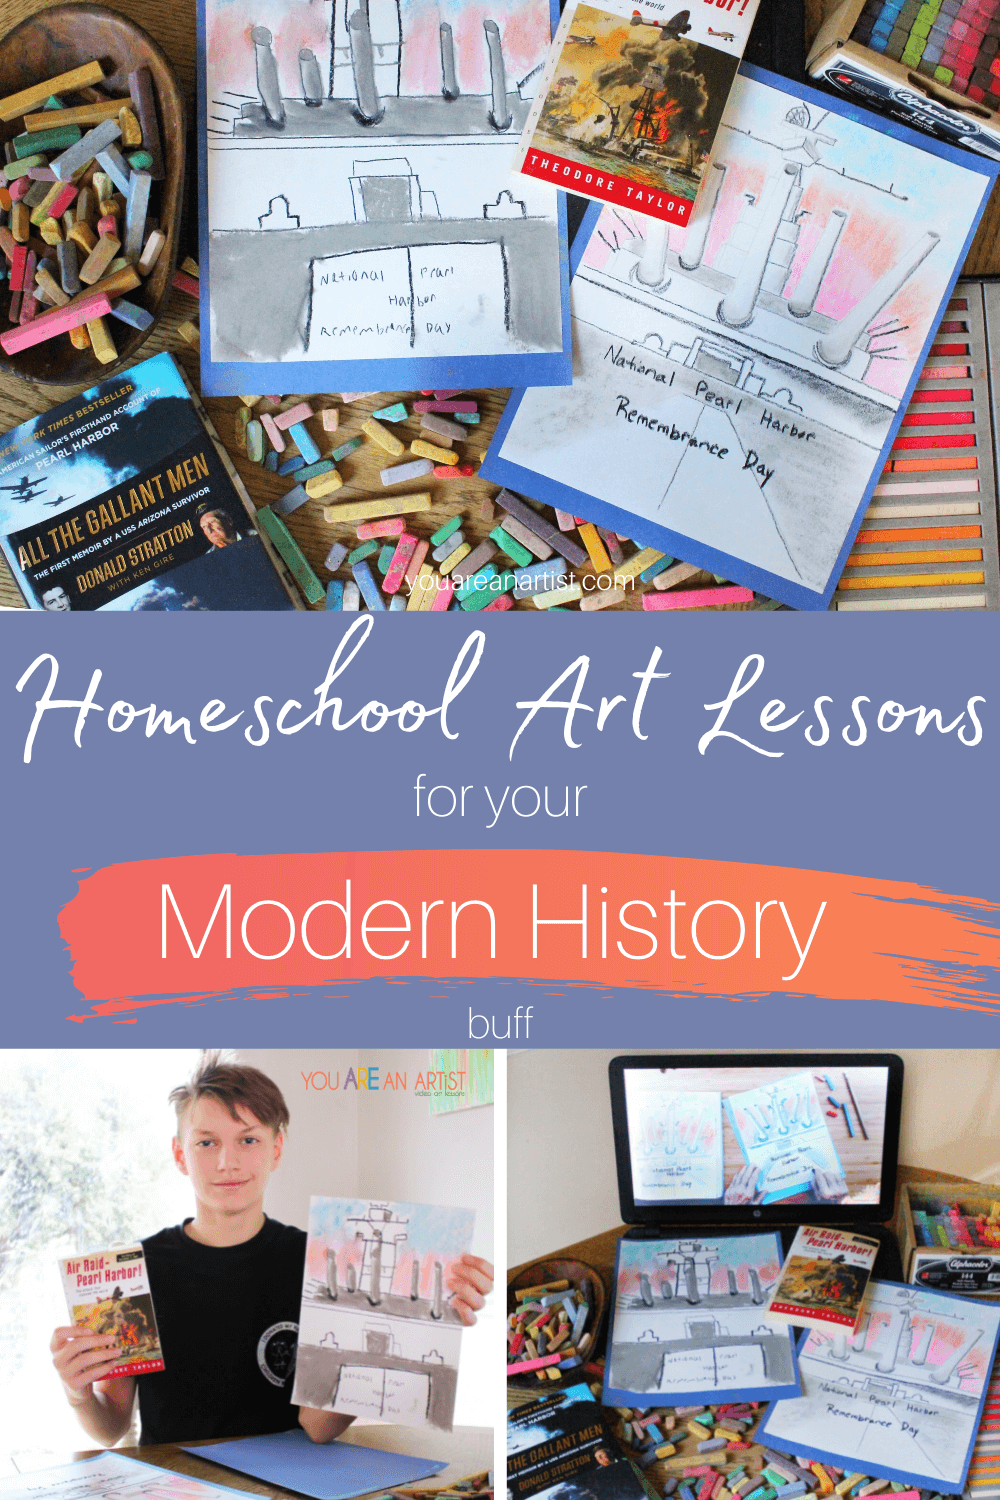 Homeschool Art Lessons for Your Modern History Buff: These modern history art lessons are perfect for adding a bit of art to your homeschool history studies! These lessons are also excellent for history buffs, young and old. #modernhistory #modernhistoryresources #modernhistoryartlessons #pearlharbor #homeschoolartlessons #YouAREAnArtist #chalkpastels